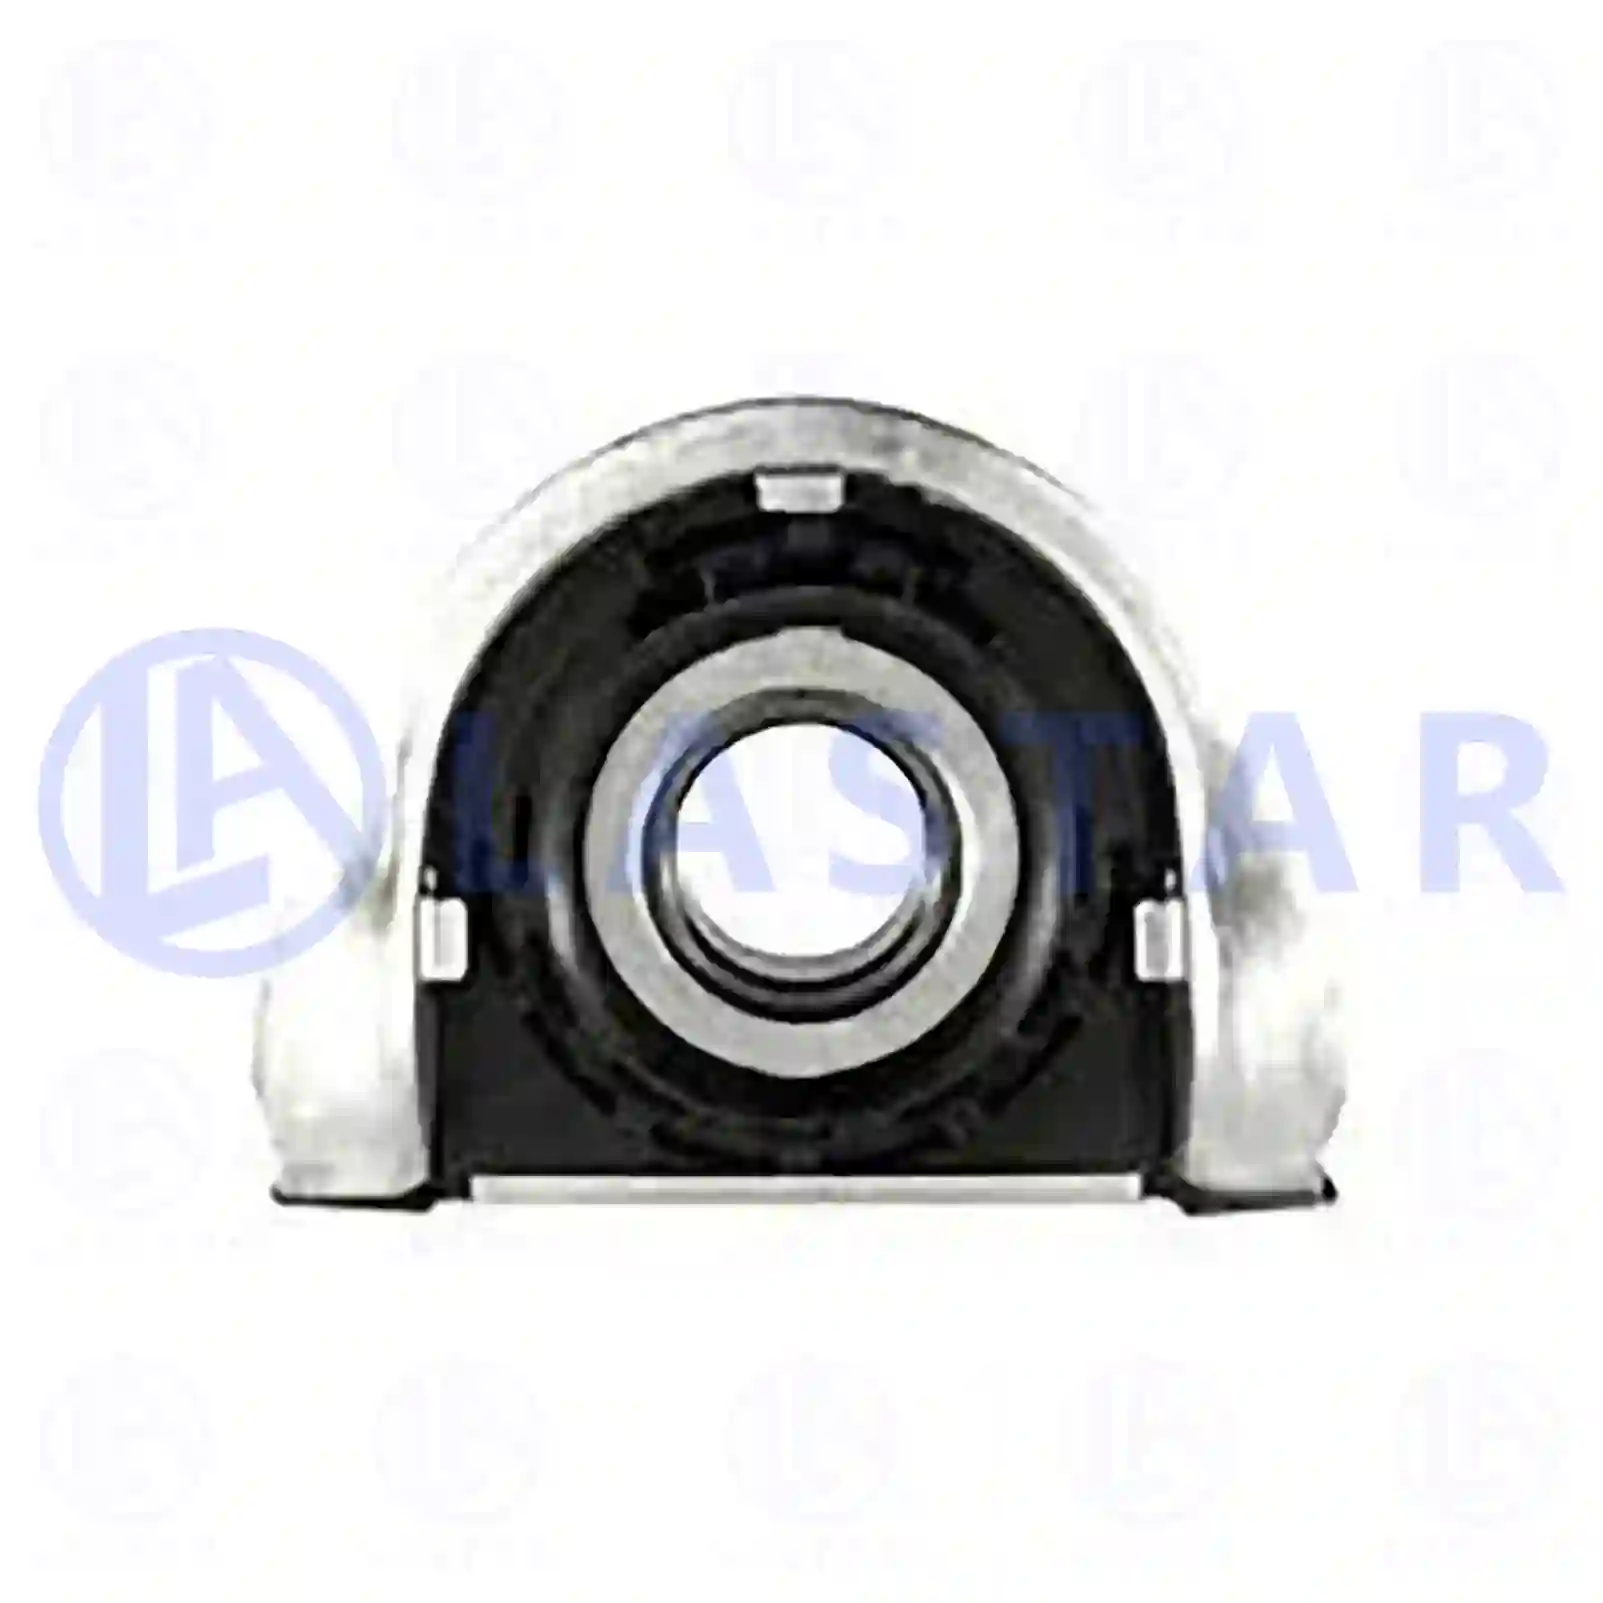 Support Bearing Center bearing, la no: 77734140 ,  oem no:8127224 Lastar Spare Part | Truck Spare Parts, Auotomotive Spare Parts